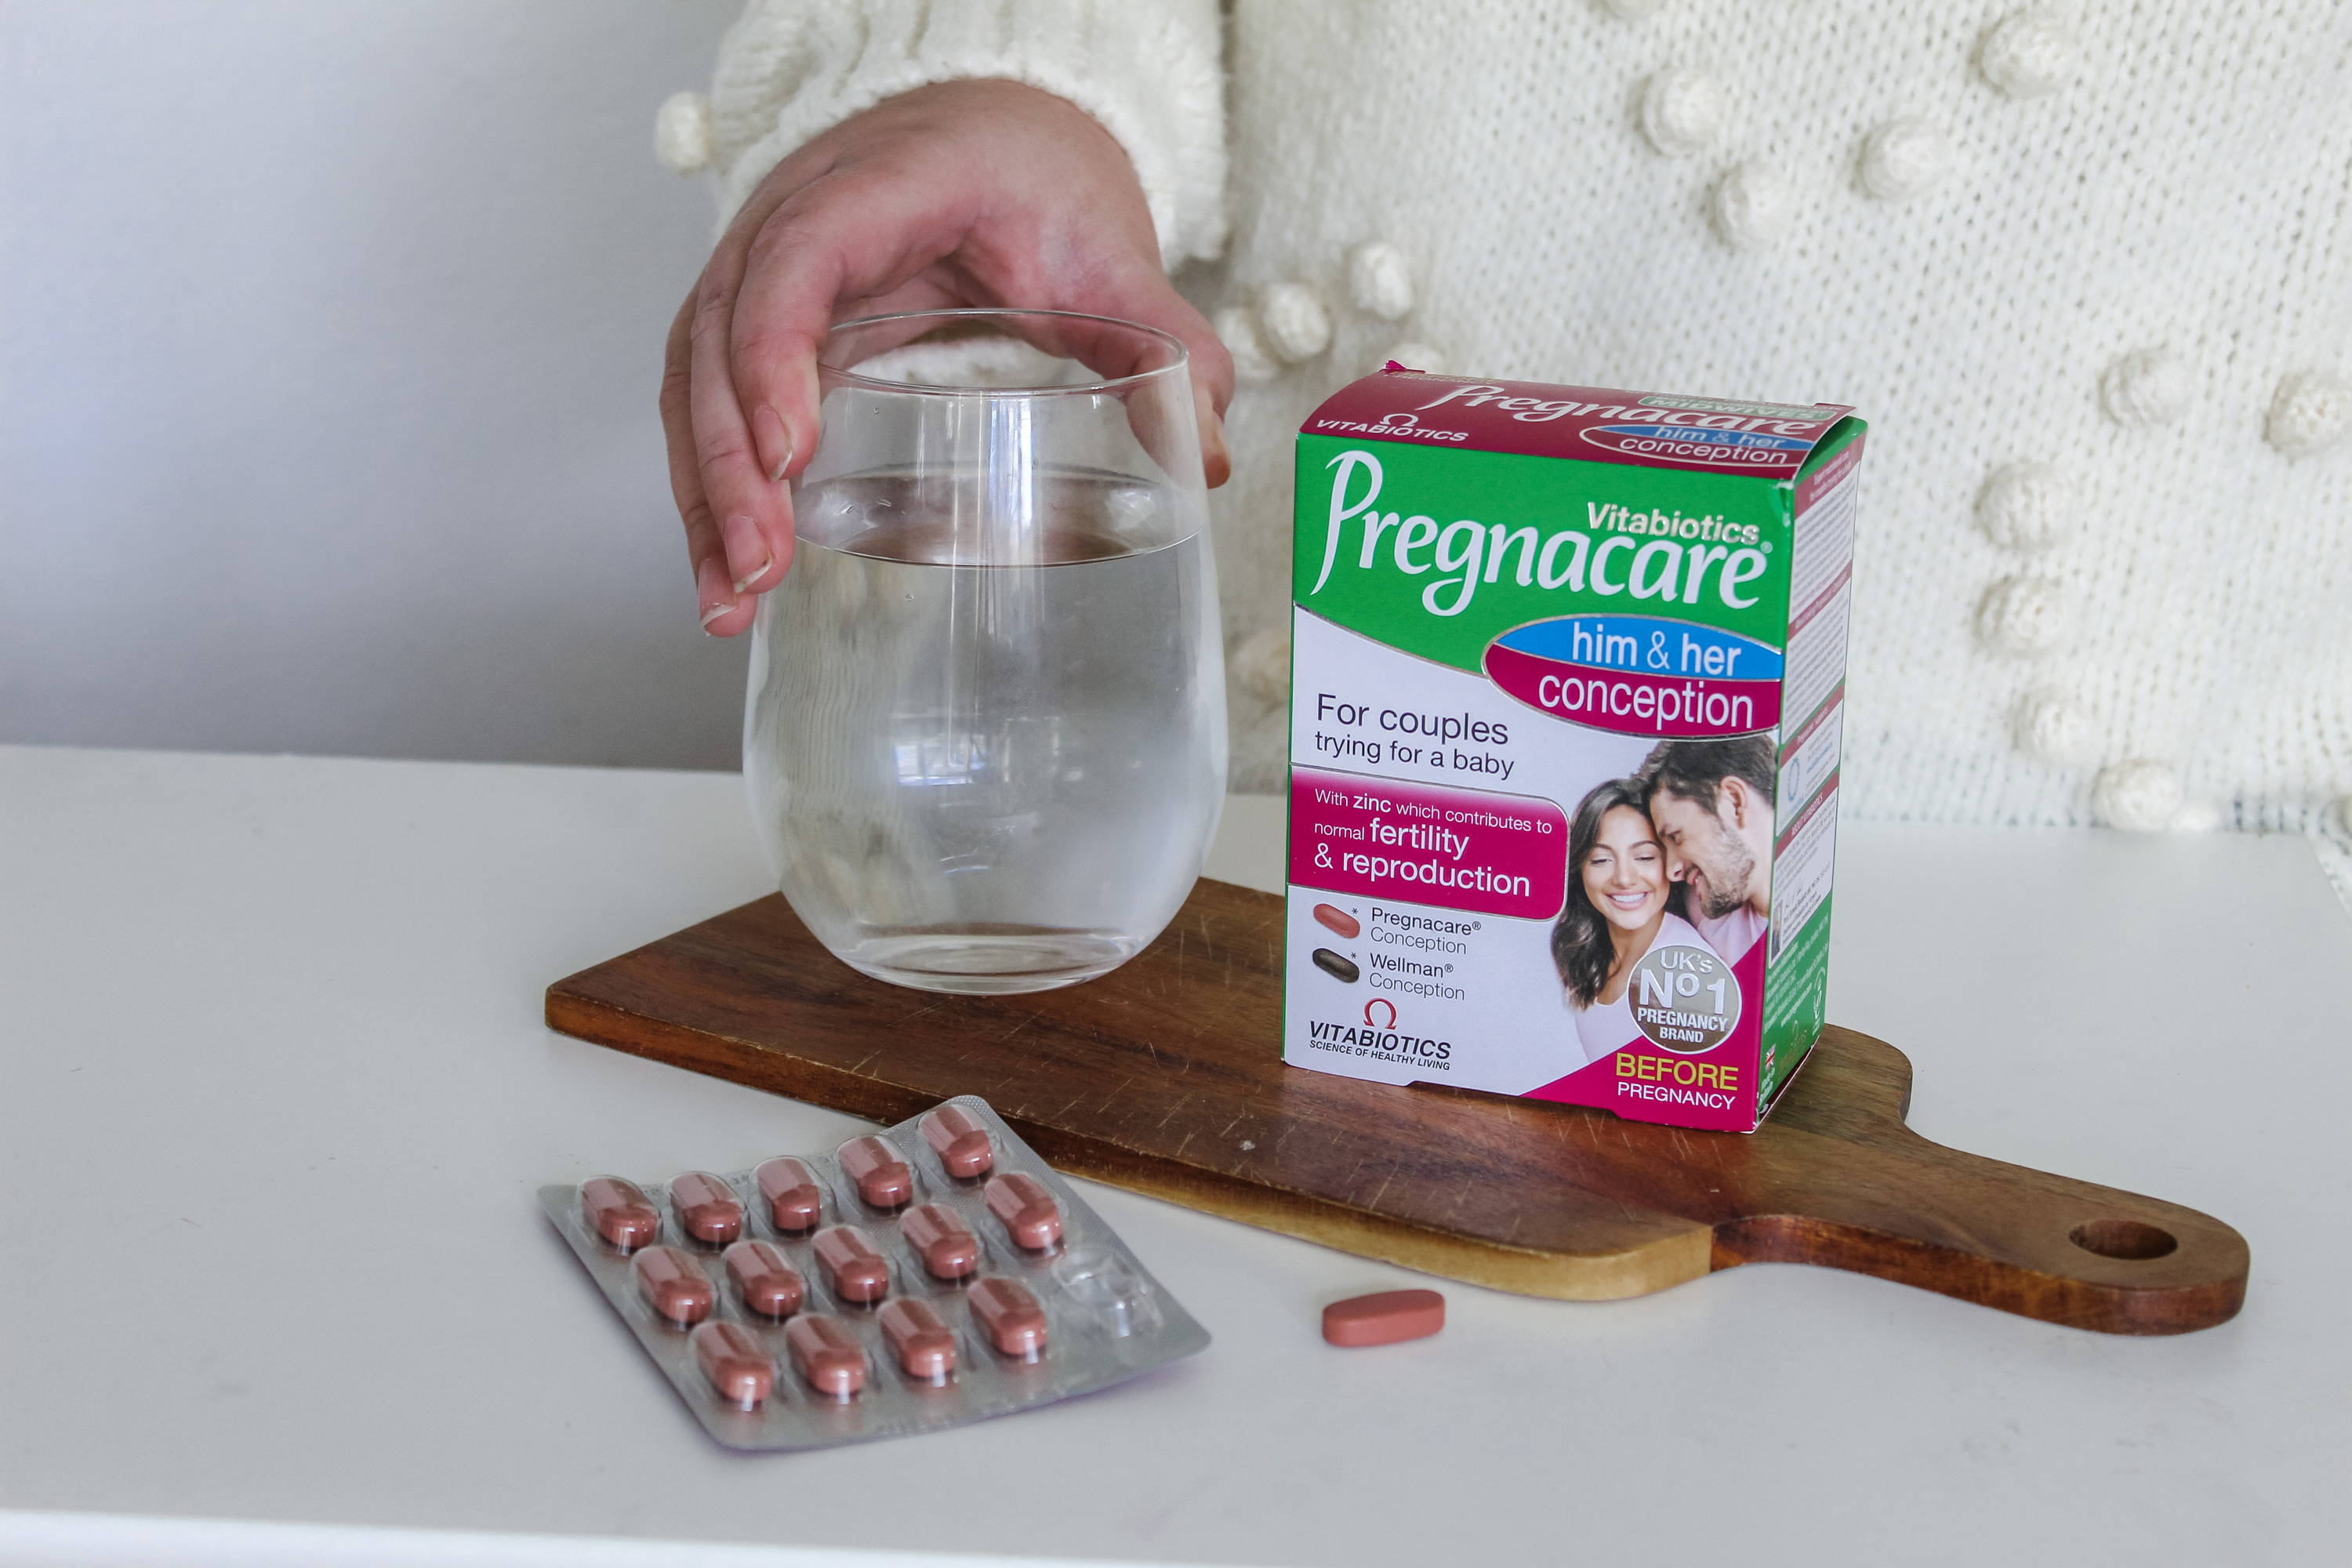 Enter Our Giveaway For The Fertility Show Tickets And Pregnacare Supplements